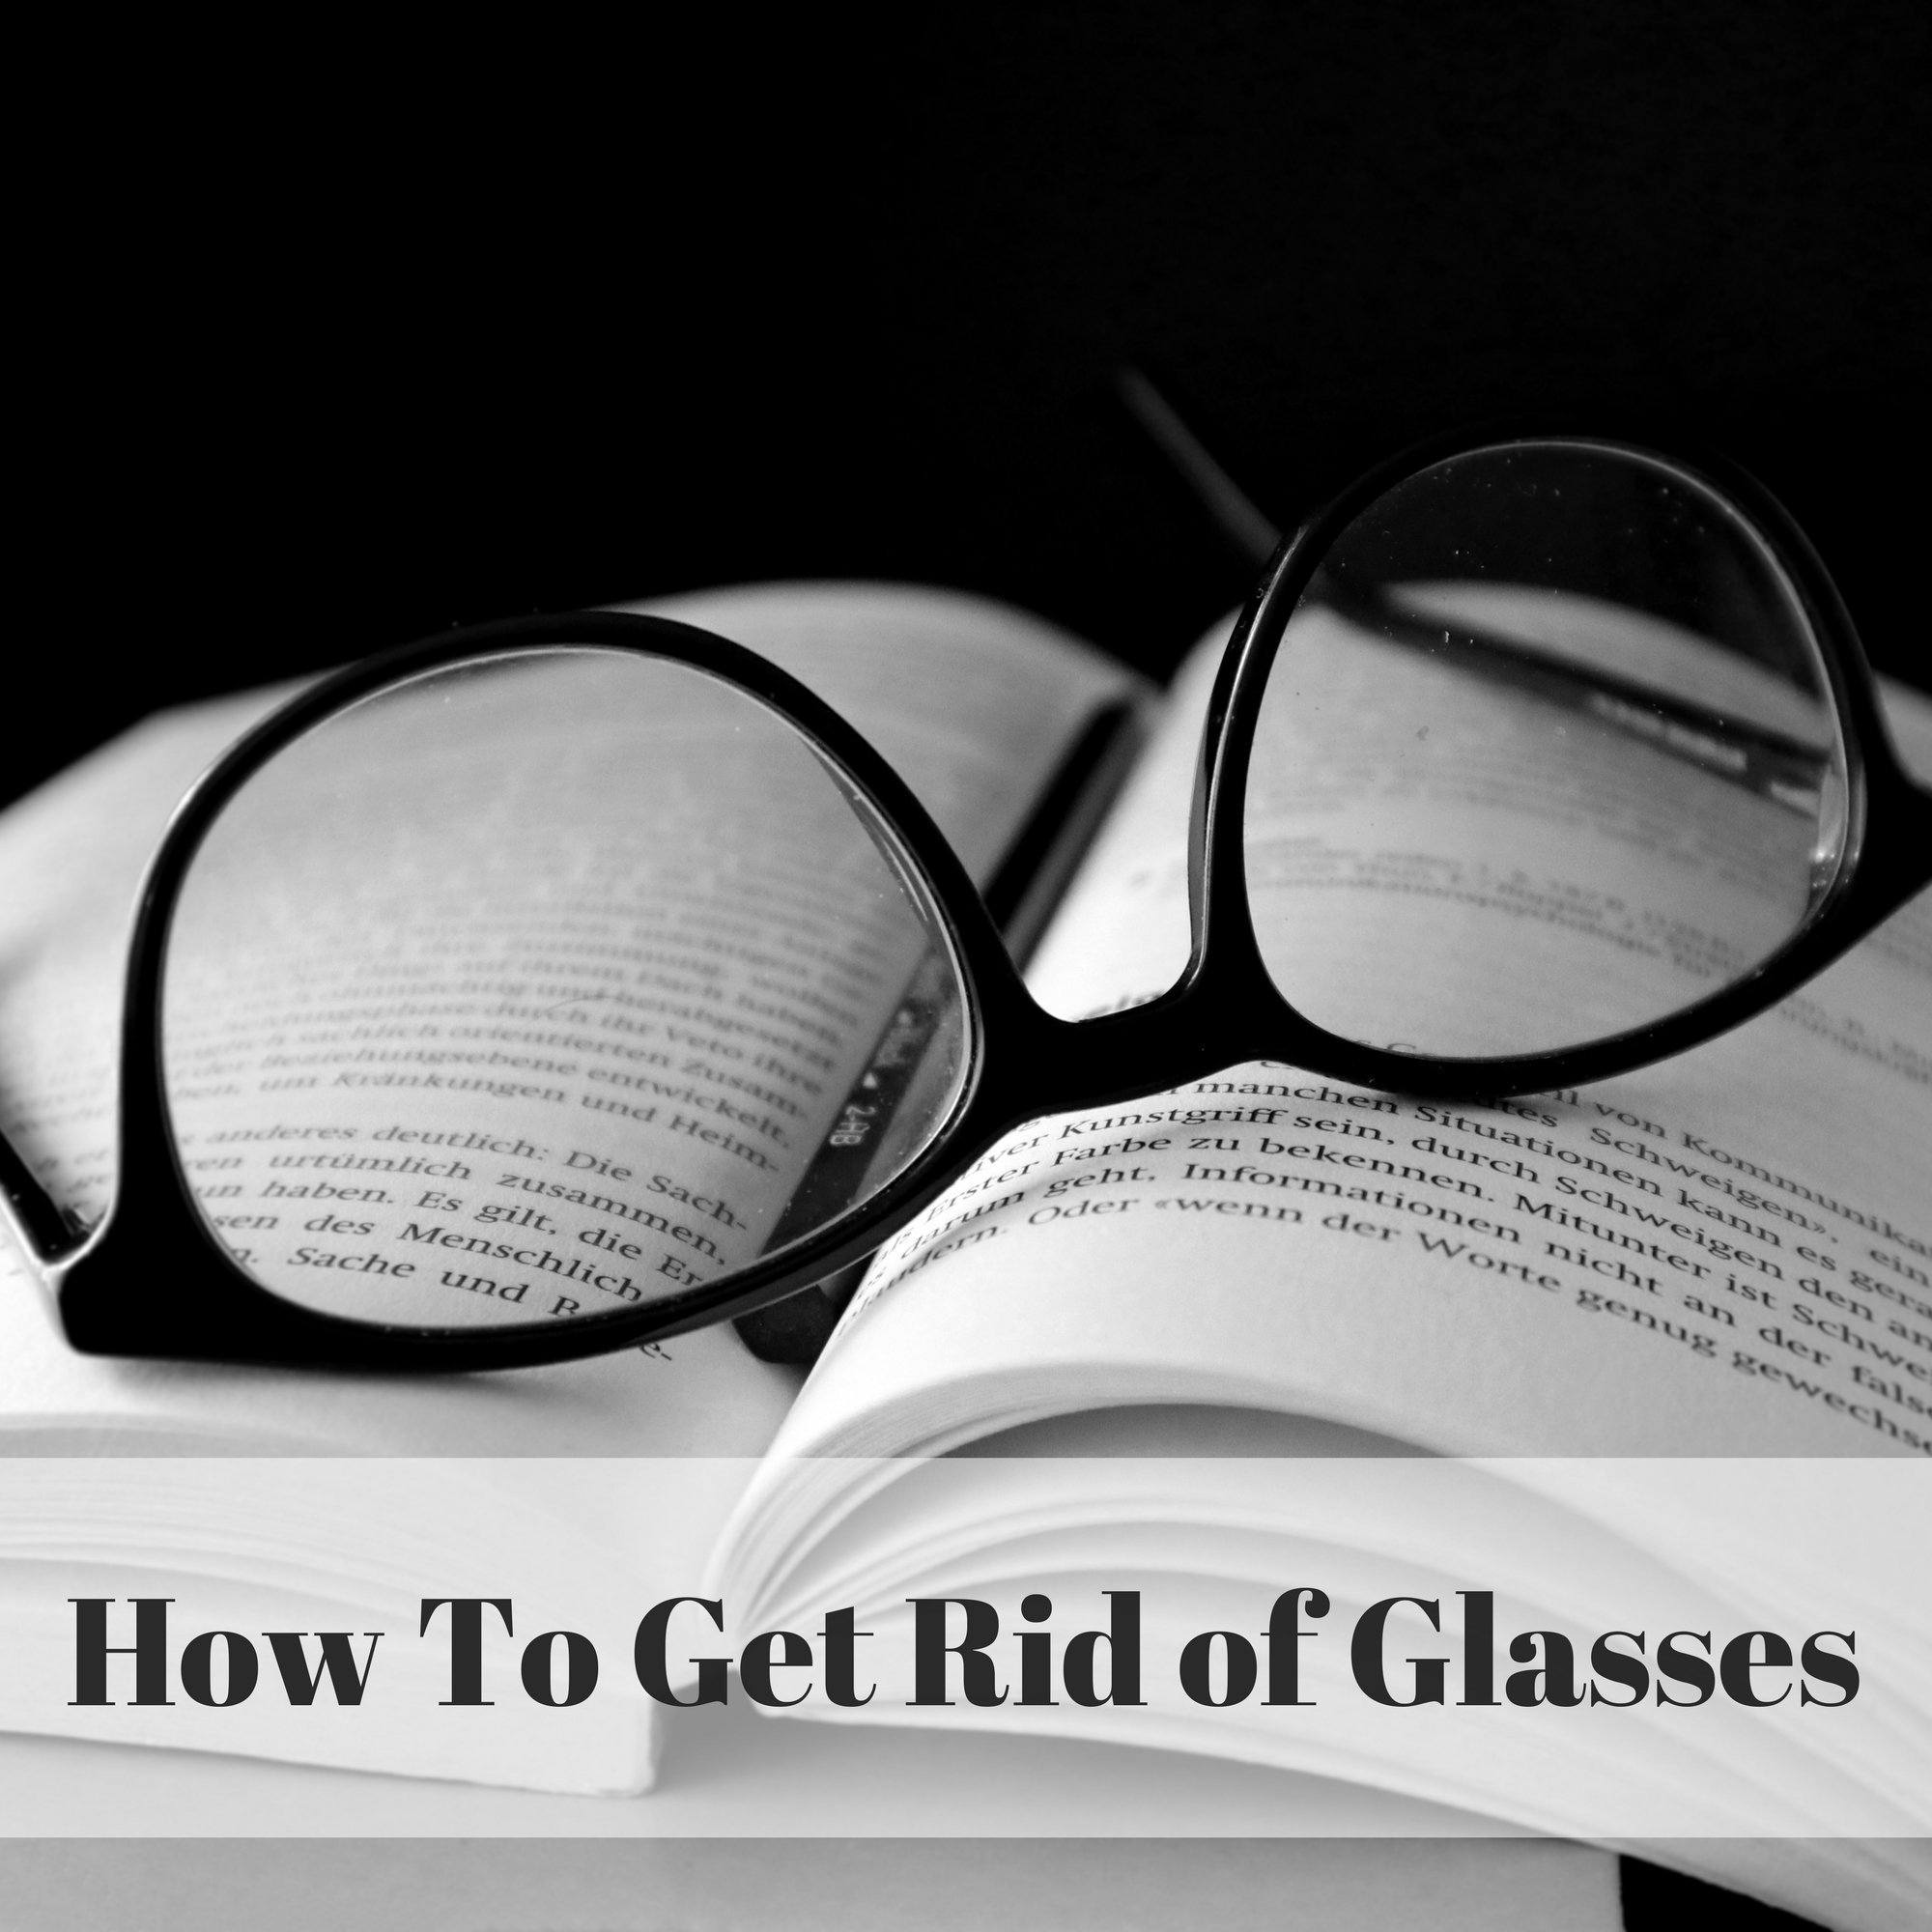 How To Get Rid of Glasses